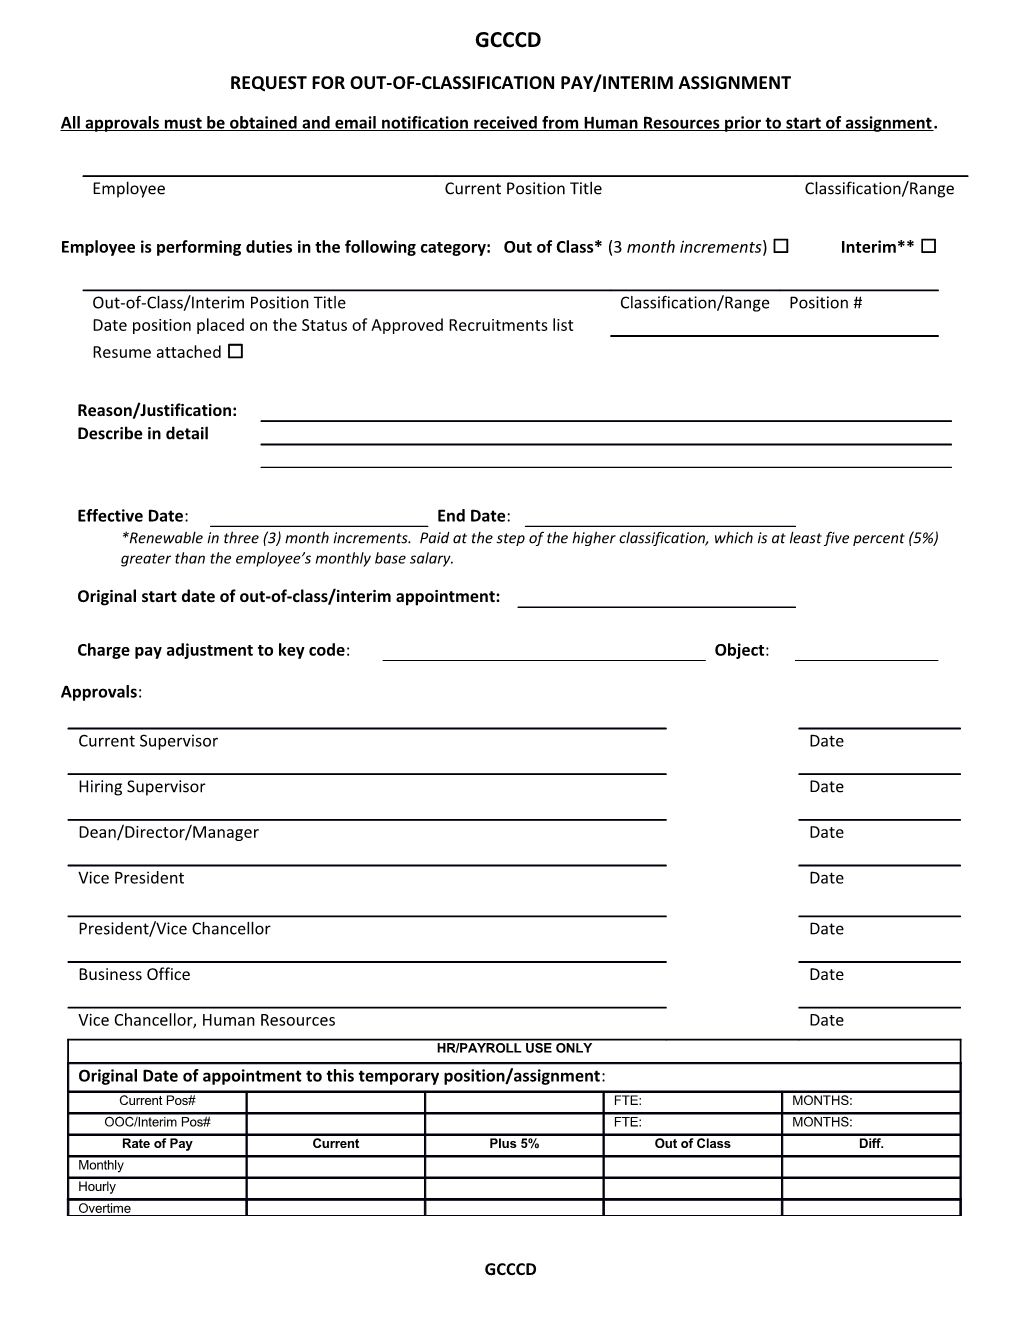 Request for out of Class Pay Interim Appointment